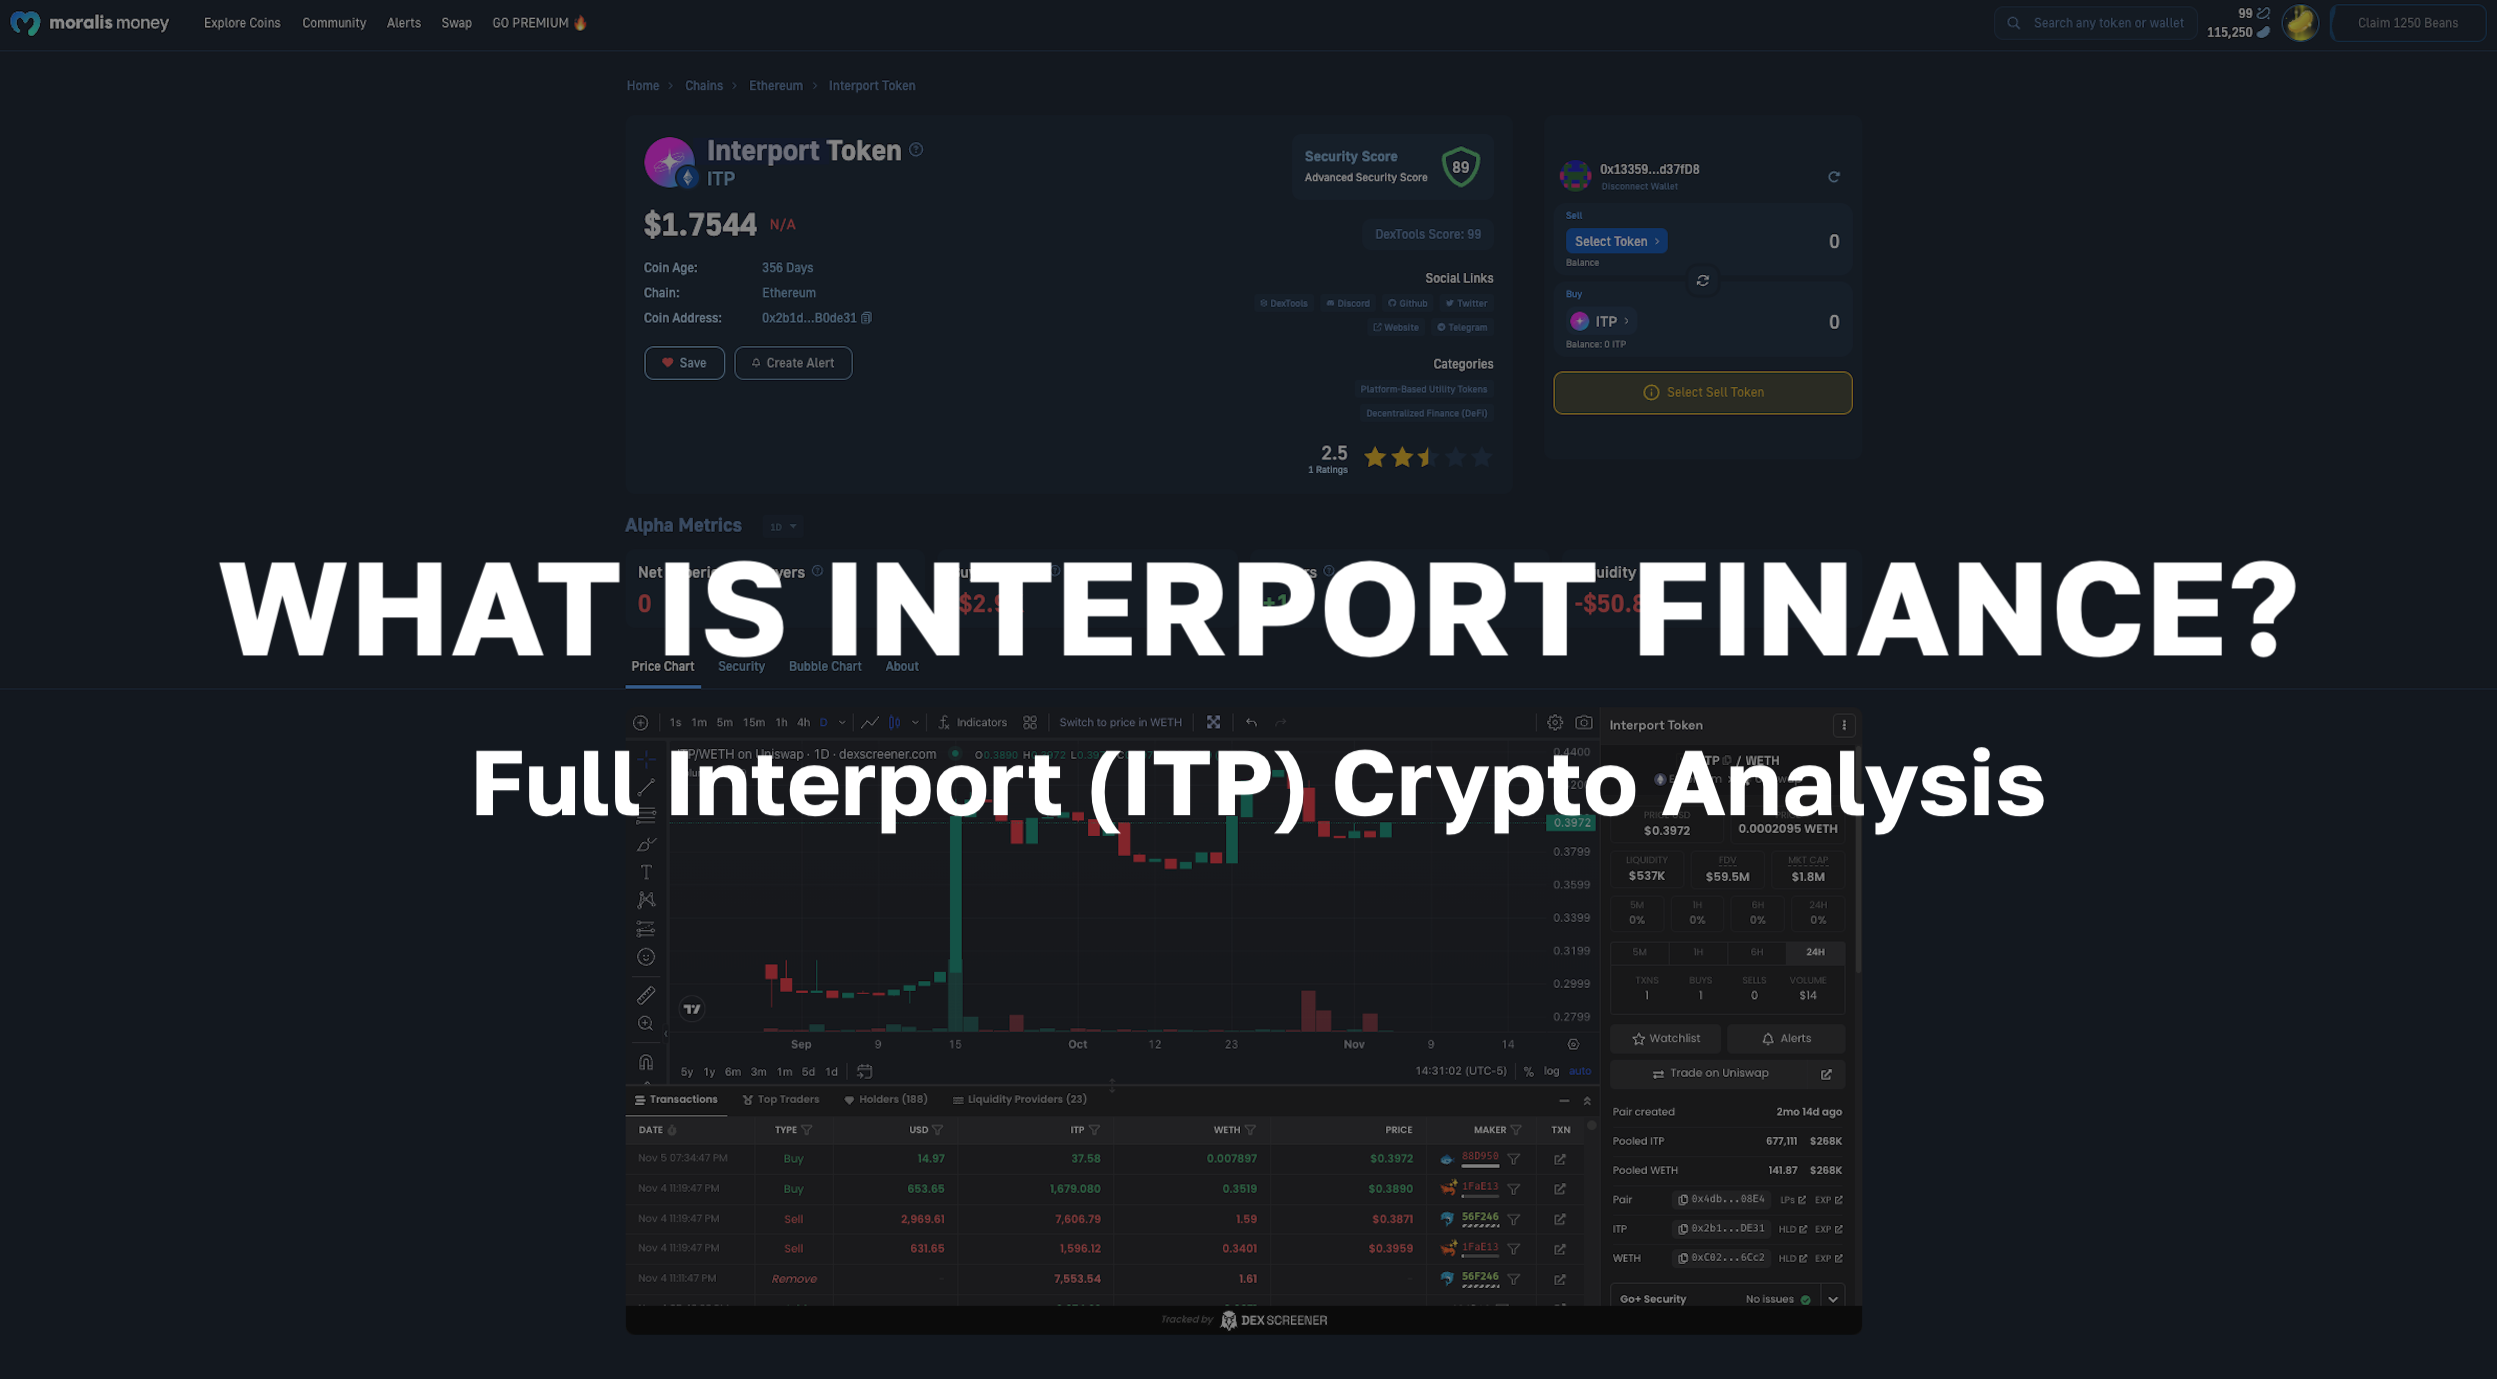 What is Interport Finance? Full Interport (ITP) Crypto Analysis